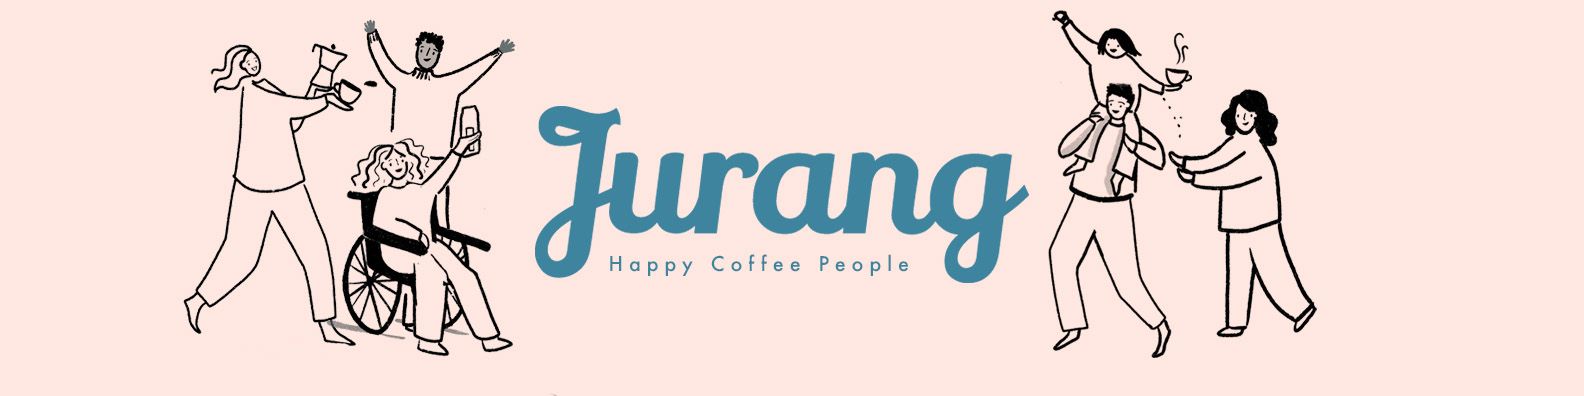 Happy Coffee People Banner